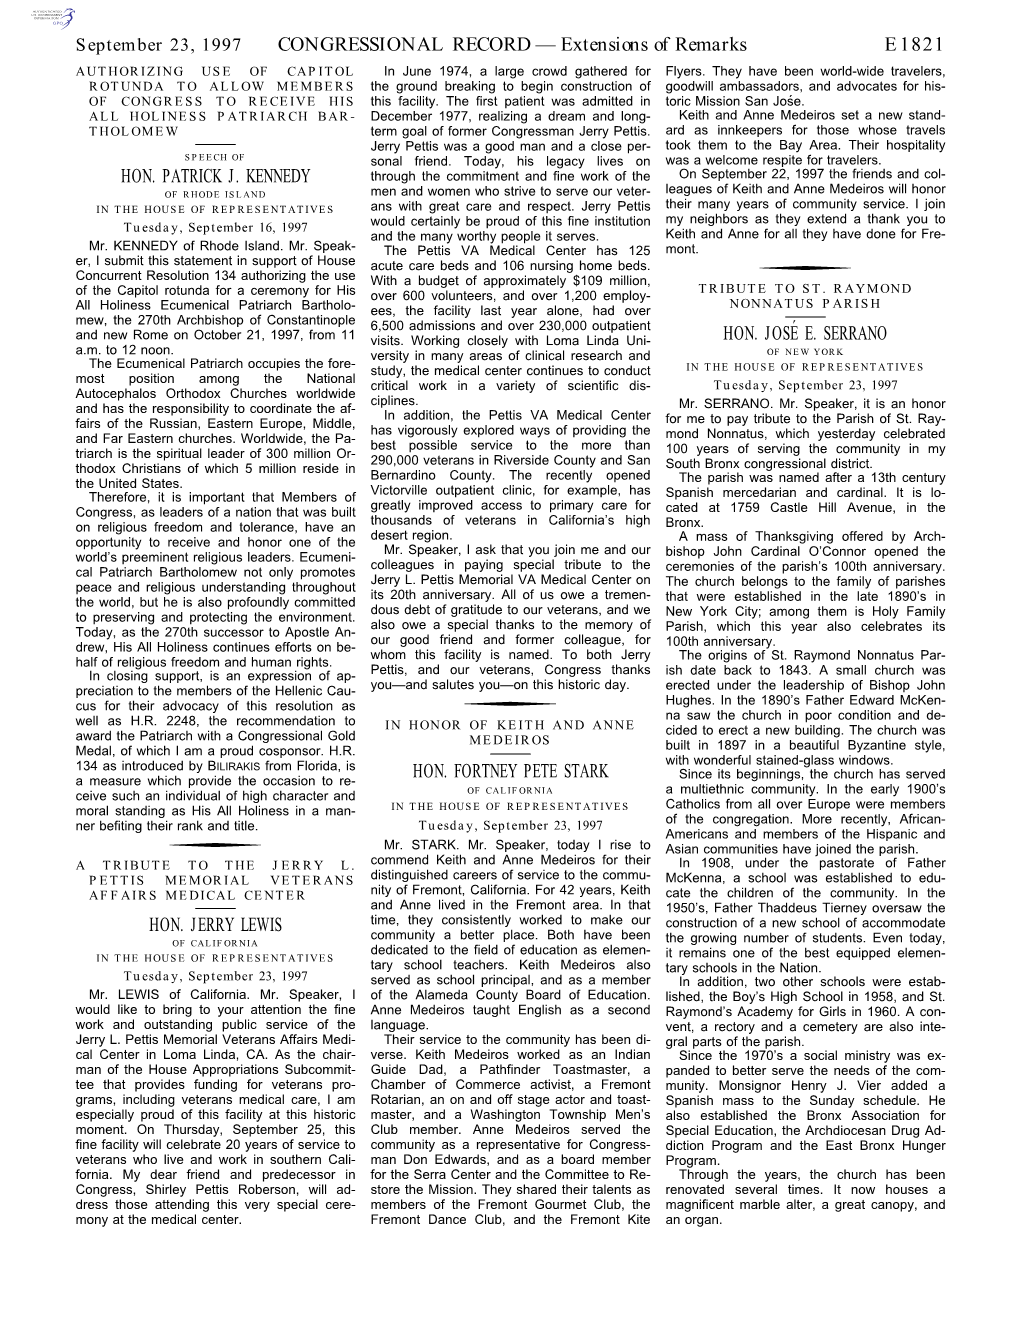 CONGRESSIONAL RECORD— Extensions of Remarks E1821 HON